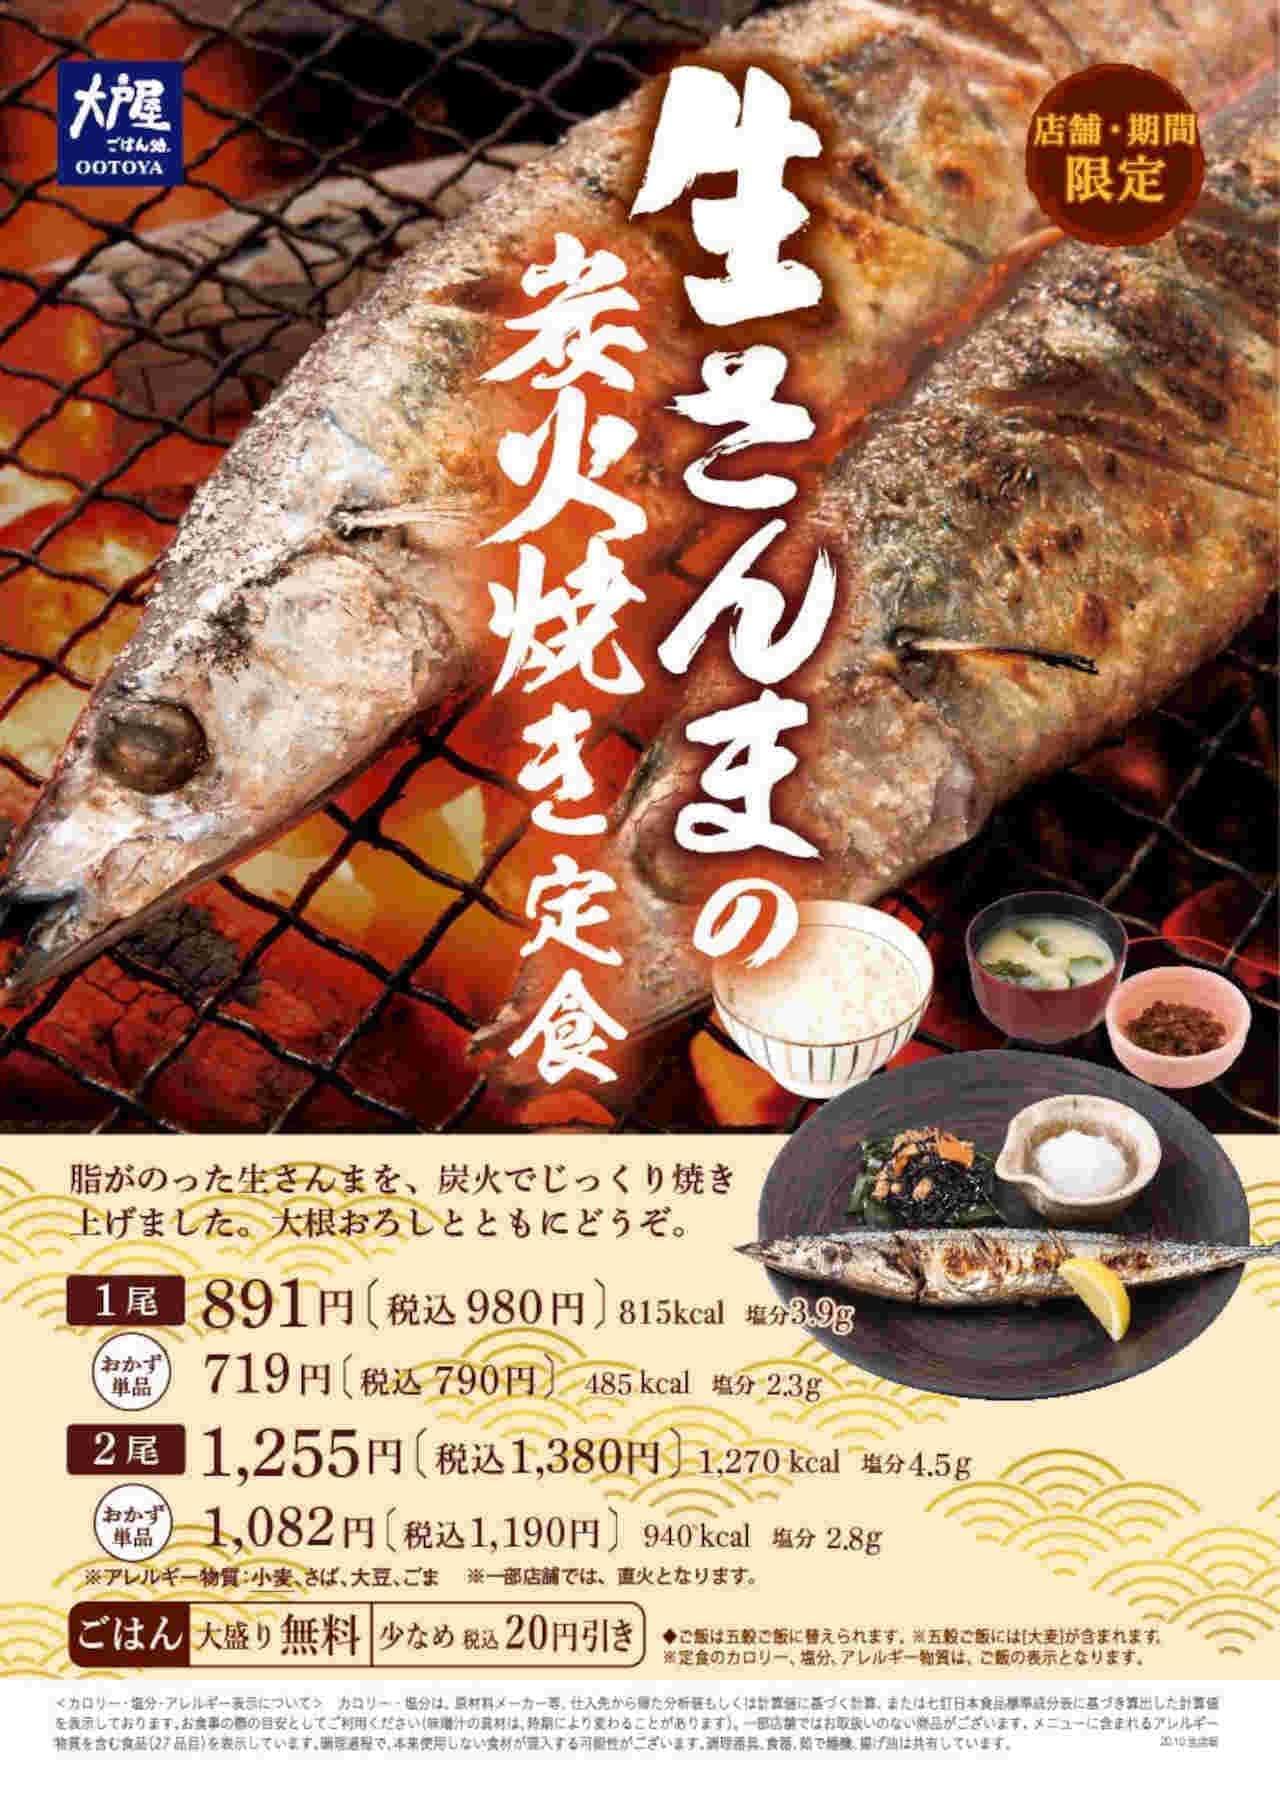 "Raw pacific saury Charcoal Grilled Set Meal" at Ootoya